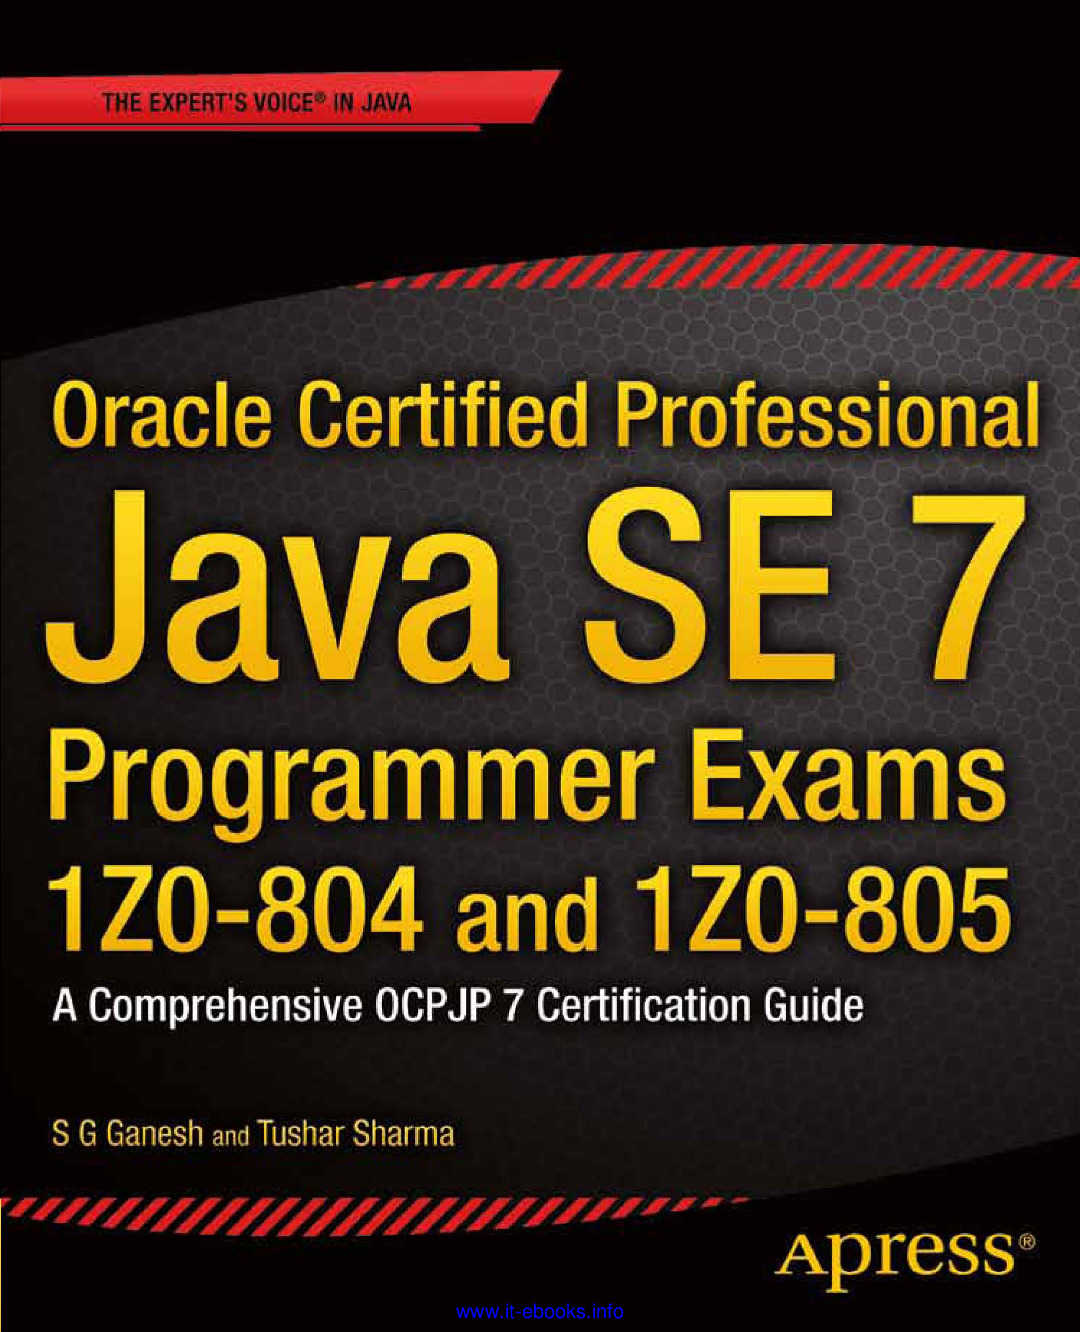 [JAVA][Oracle Certified Professional Java SE 7 Programmer Exams 1Z0-804 and 1Z0-805]